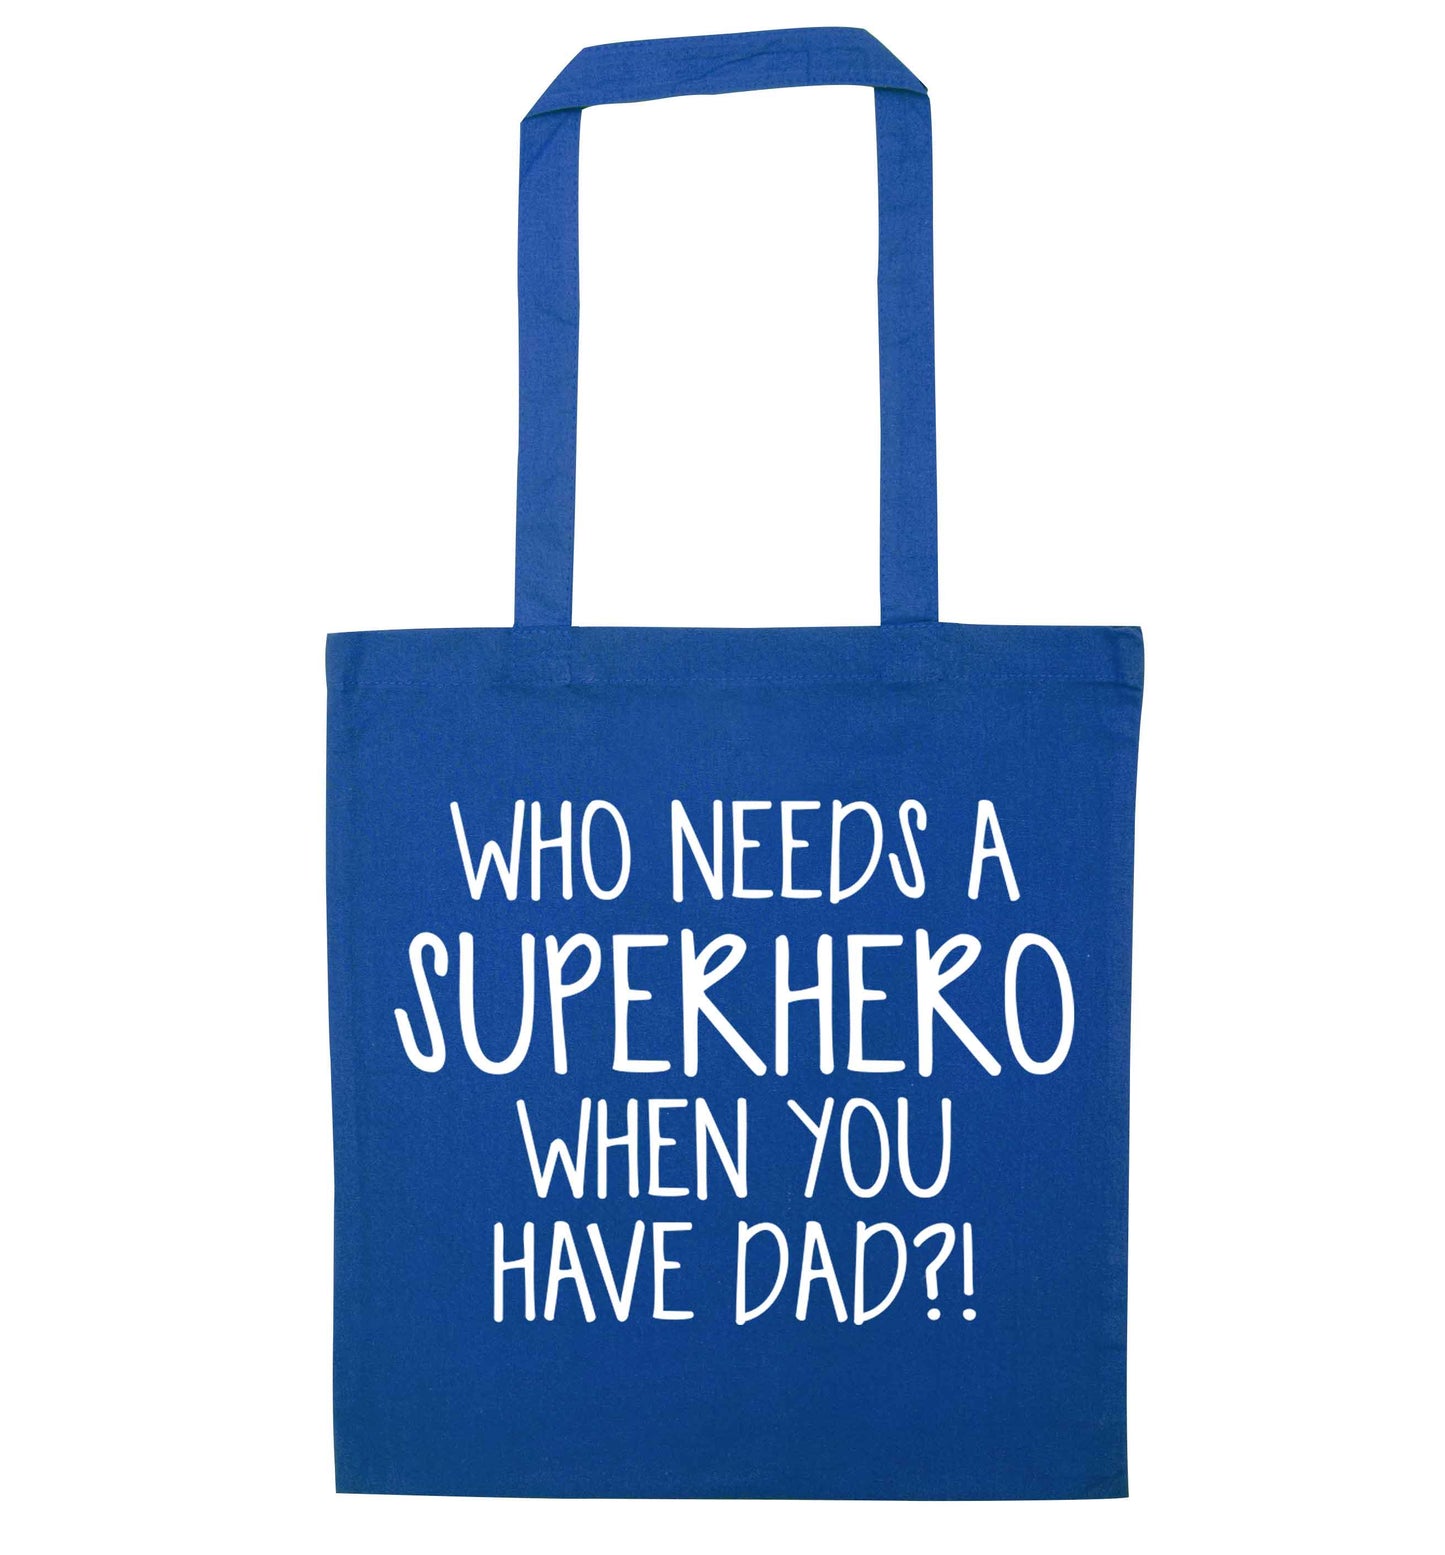 Who needs a superhero when you have dad! blue tote bag